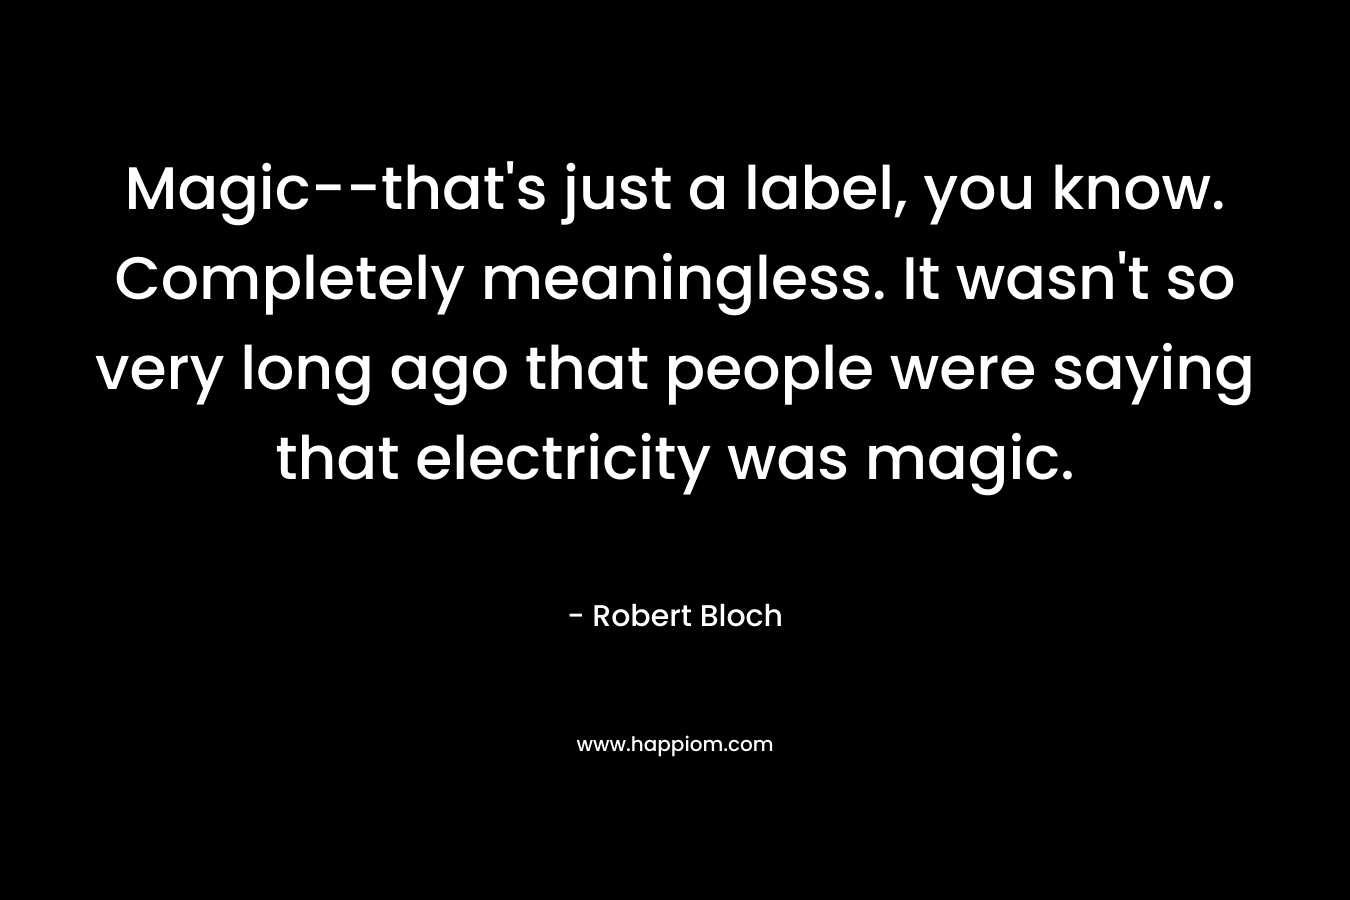 Magic--that's just a label, you know. Completely meaningless. It wasn't so very long ago that people were saying that electricity was magic.